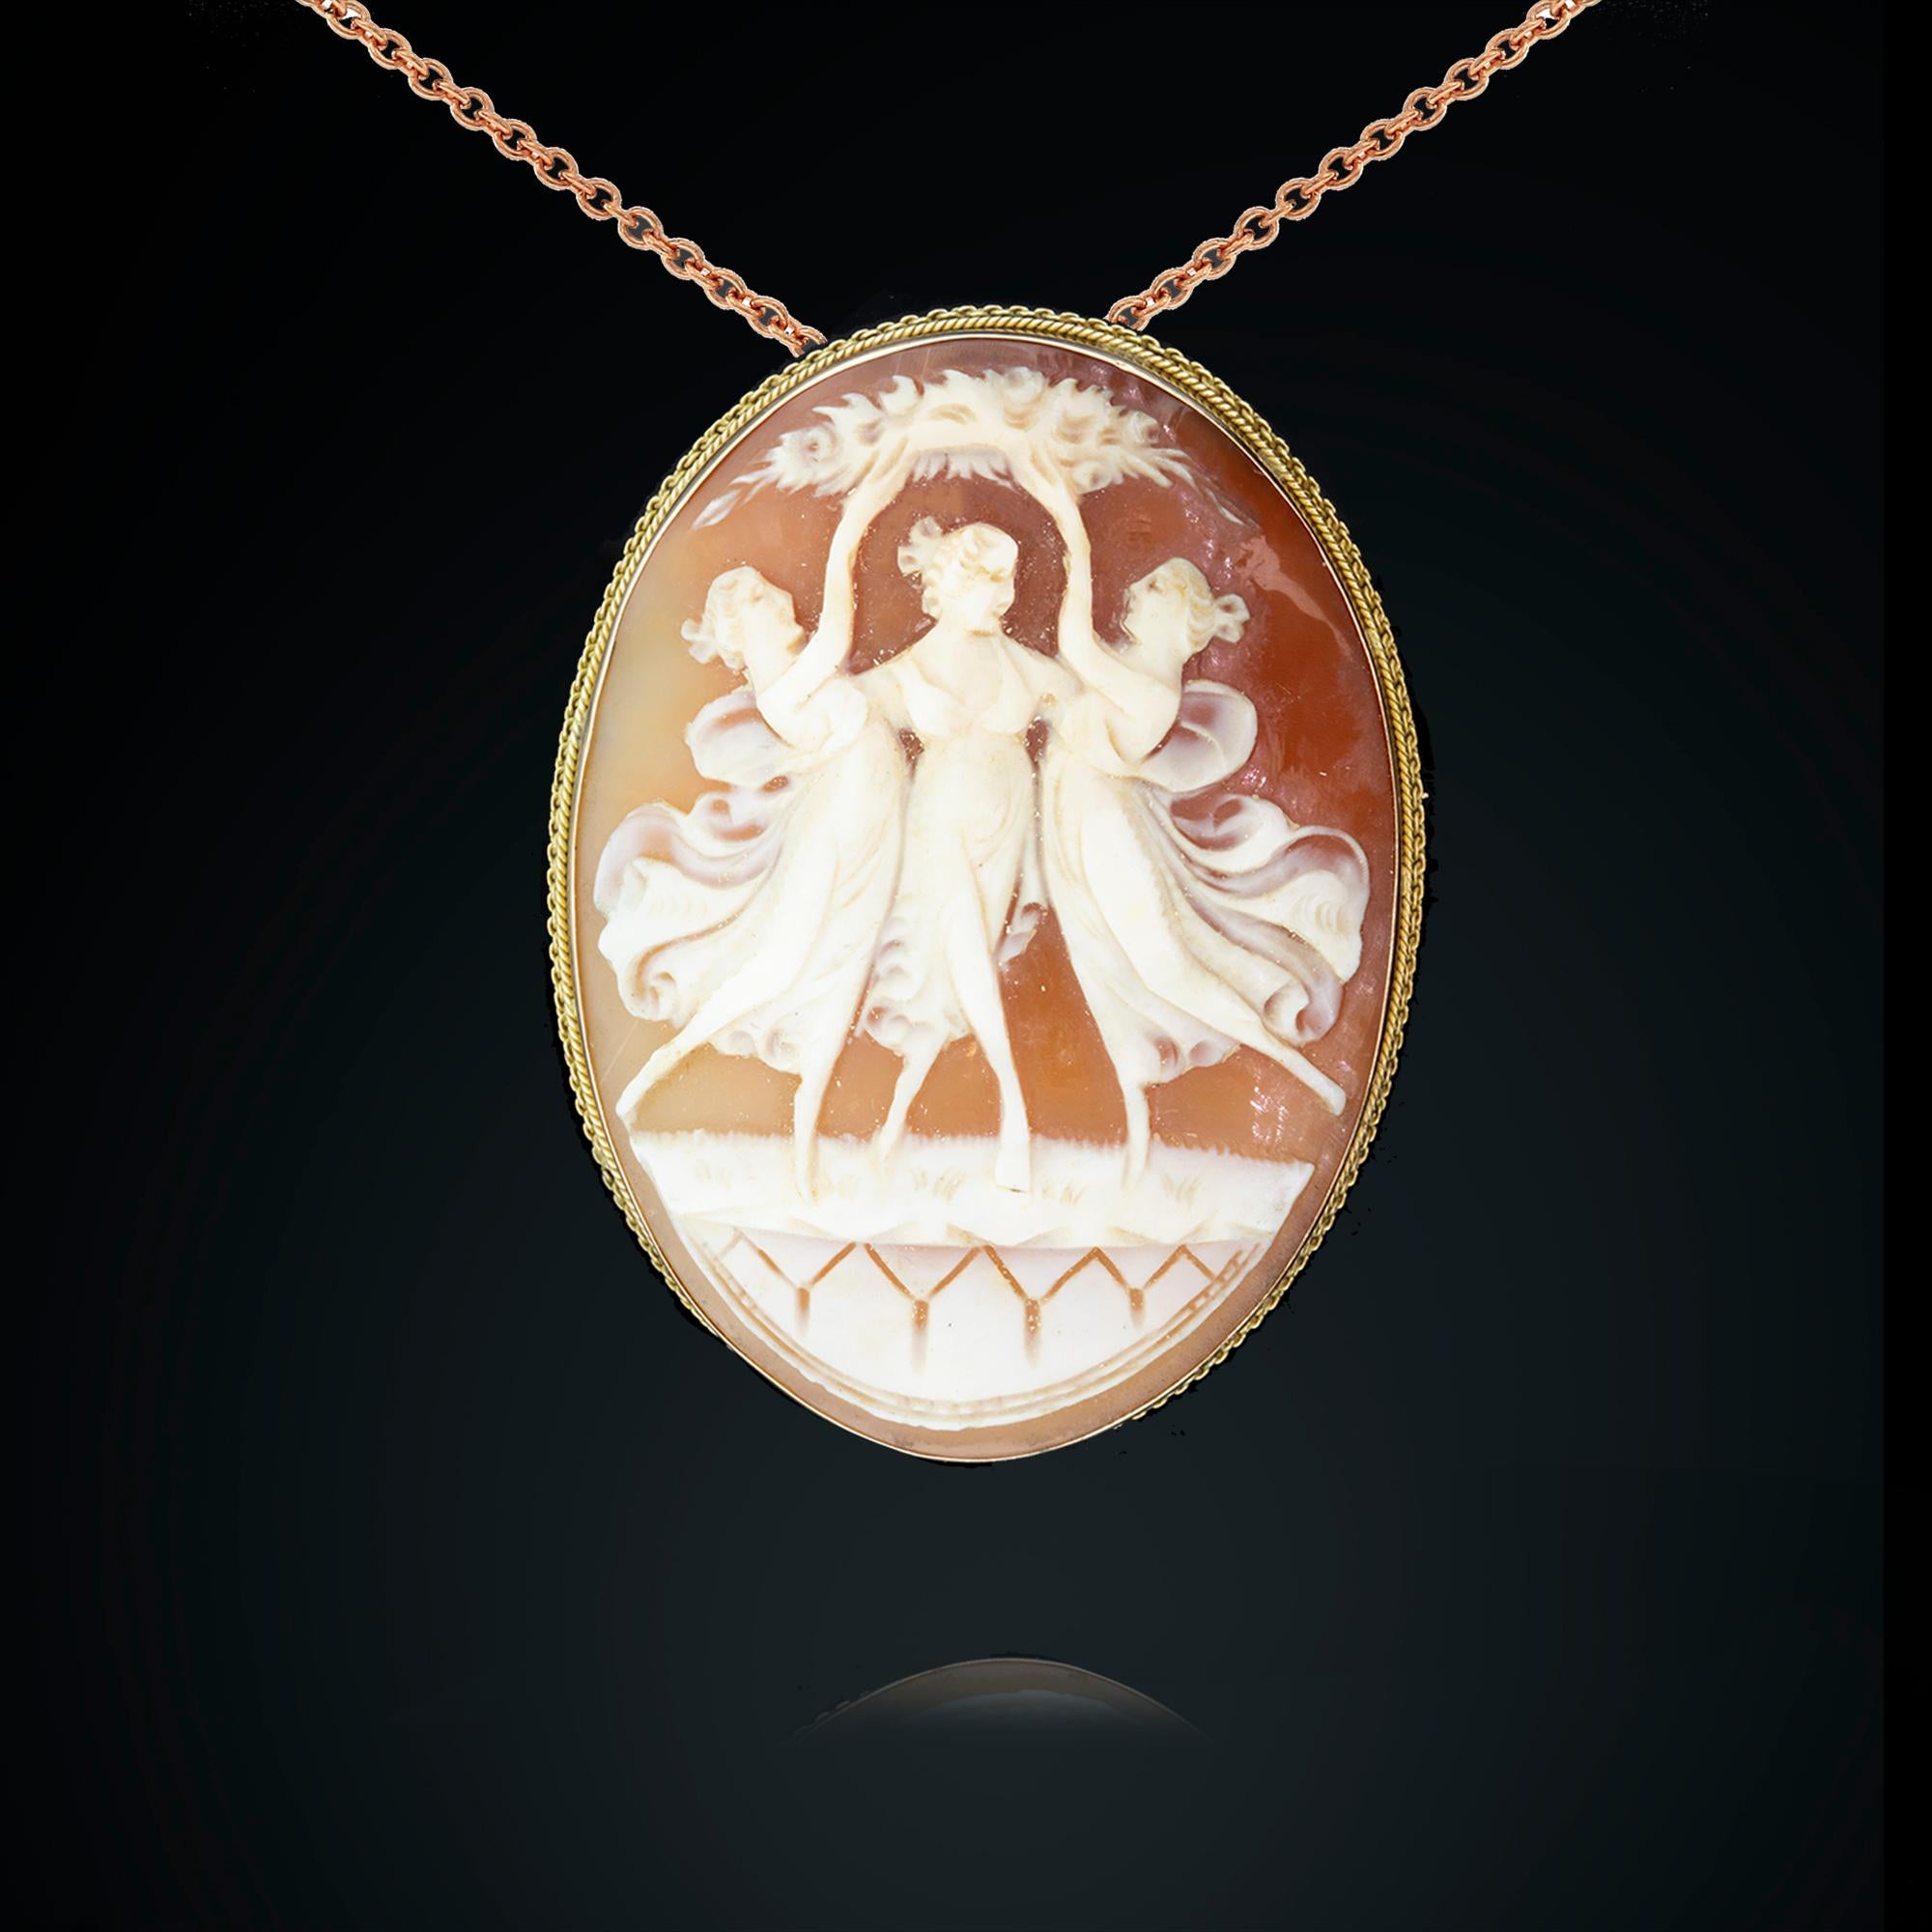 One 18k yellow gold hand carved shell cameo depicting the antique Greek theme of the “Three Muses”. Gold pin, roller catch, and collapsible pendant runner.

Metal: 18k yellow gold
Weight: 15.13 grams
Measurements: Length 5cm, width 3.7cm
Era: Late